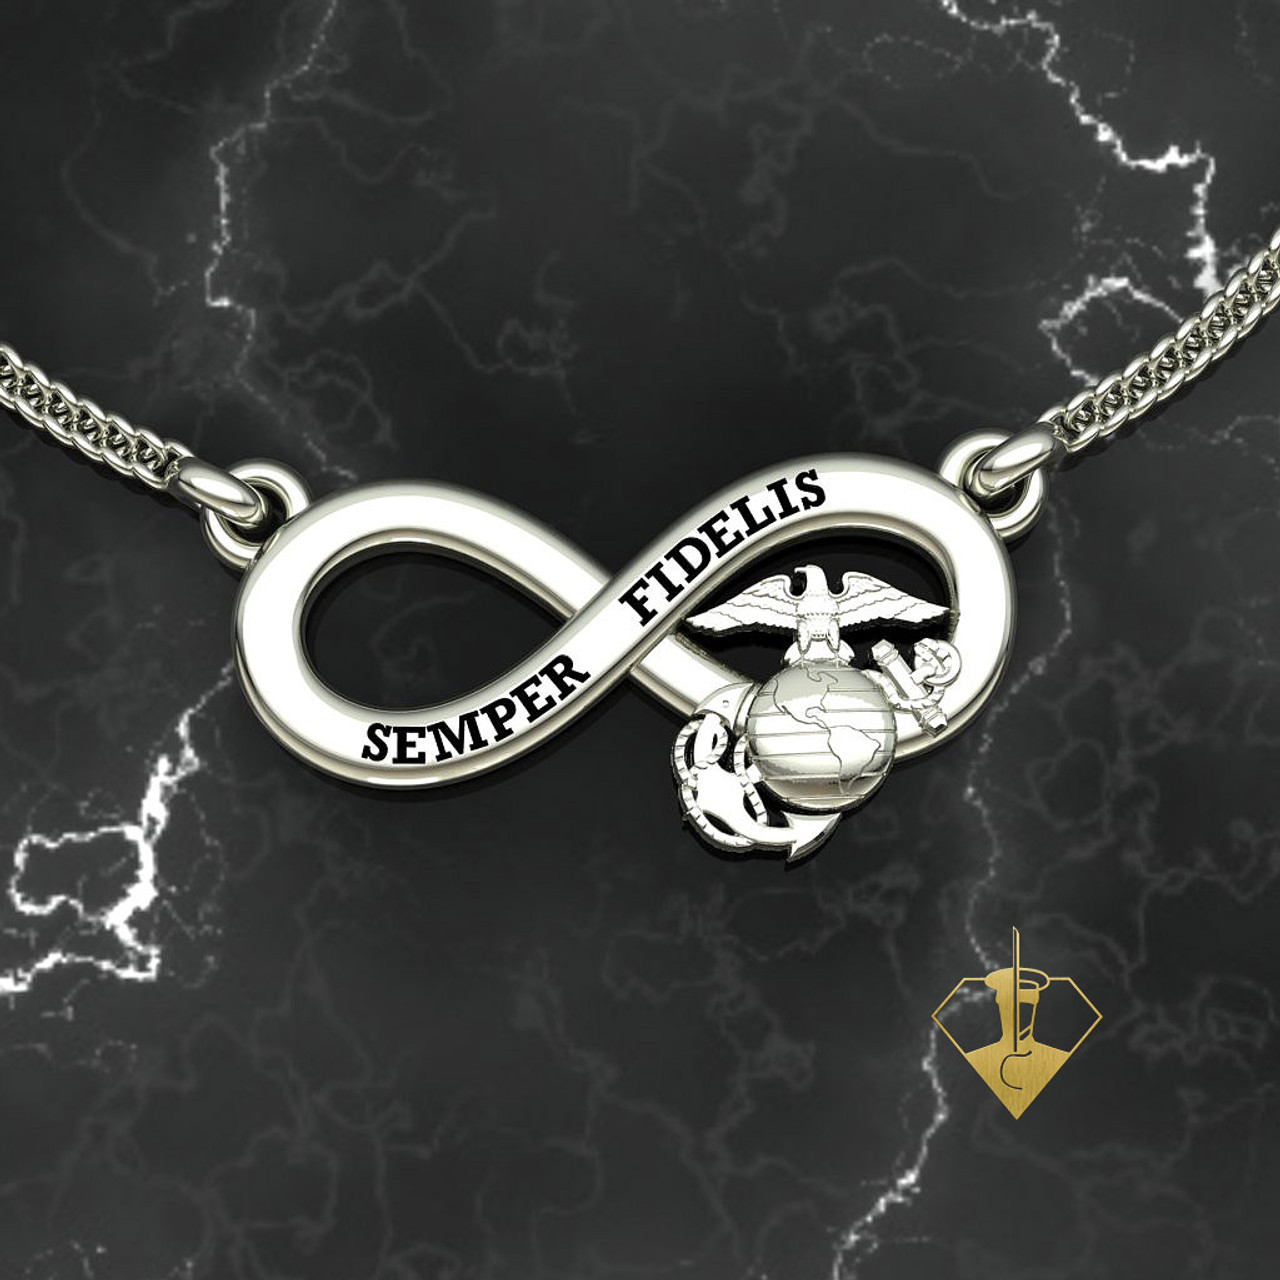 Infinity Semper Fidelis EGA Pendant
in Solid 10k White Gold with 18" Gold Chain
"Made by Marines for Marines"
Available in Sterling Silver, SS, 14k and 18k
White or Yellow gold.

 100% Satisfaction Guaranteed